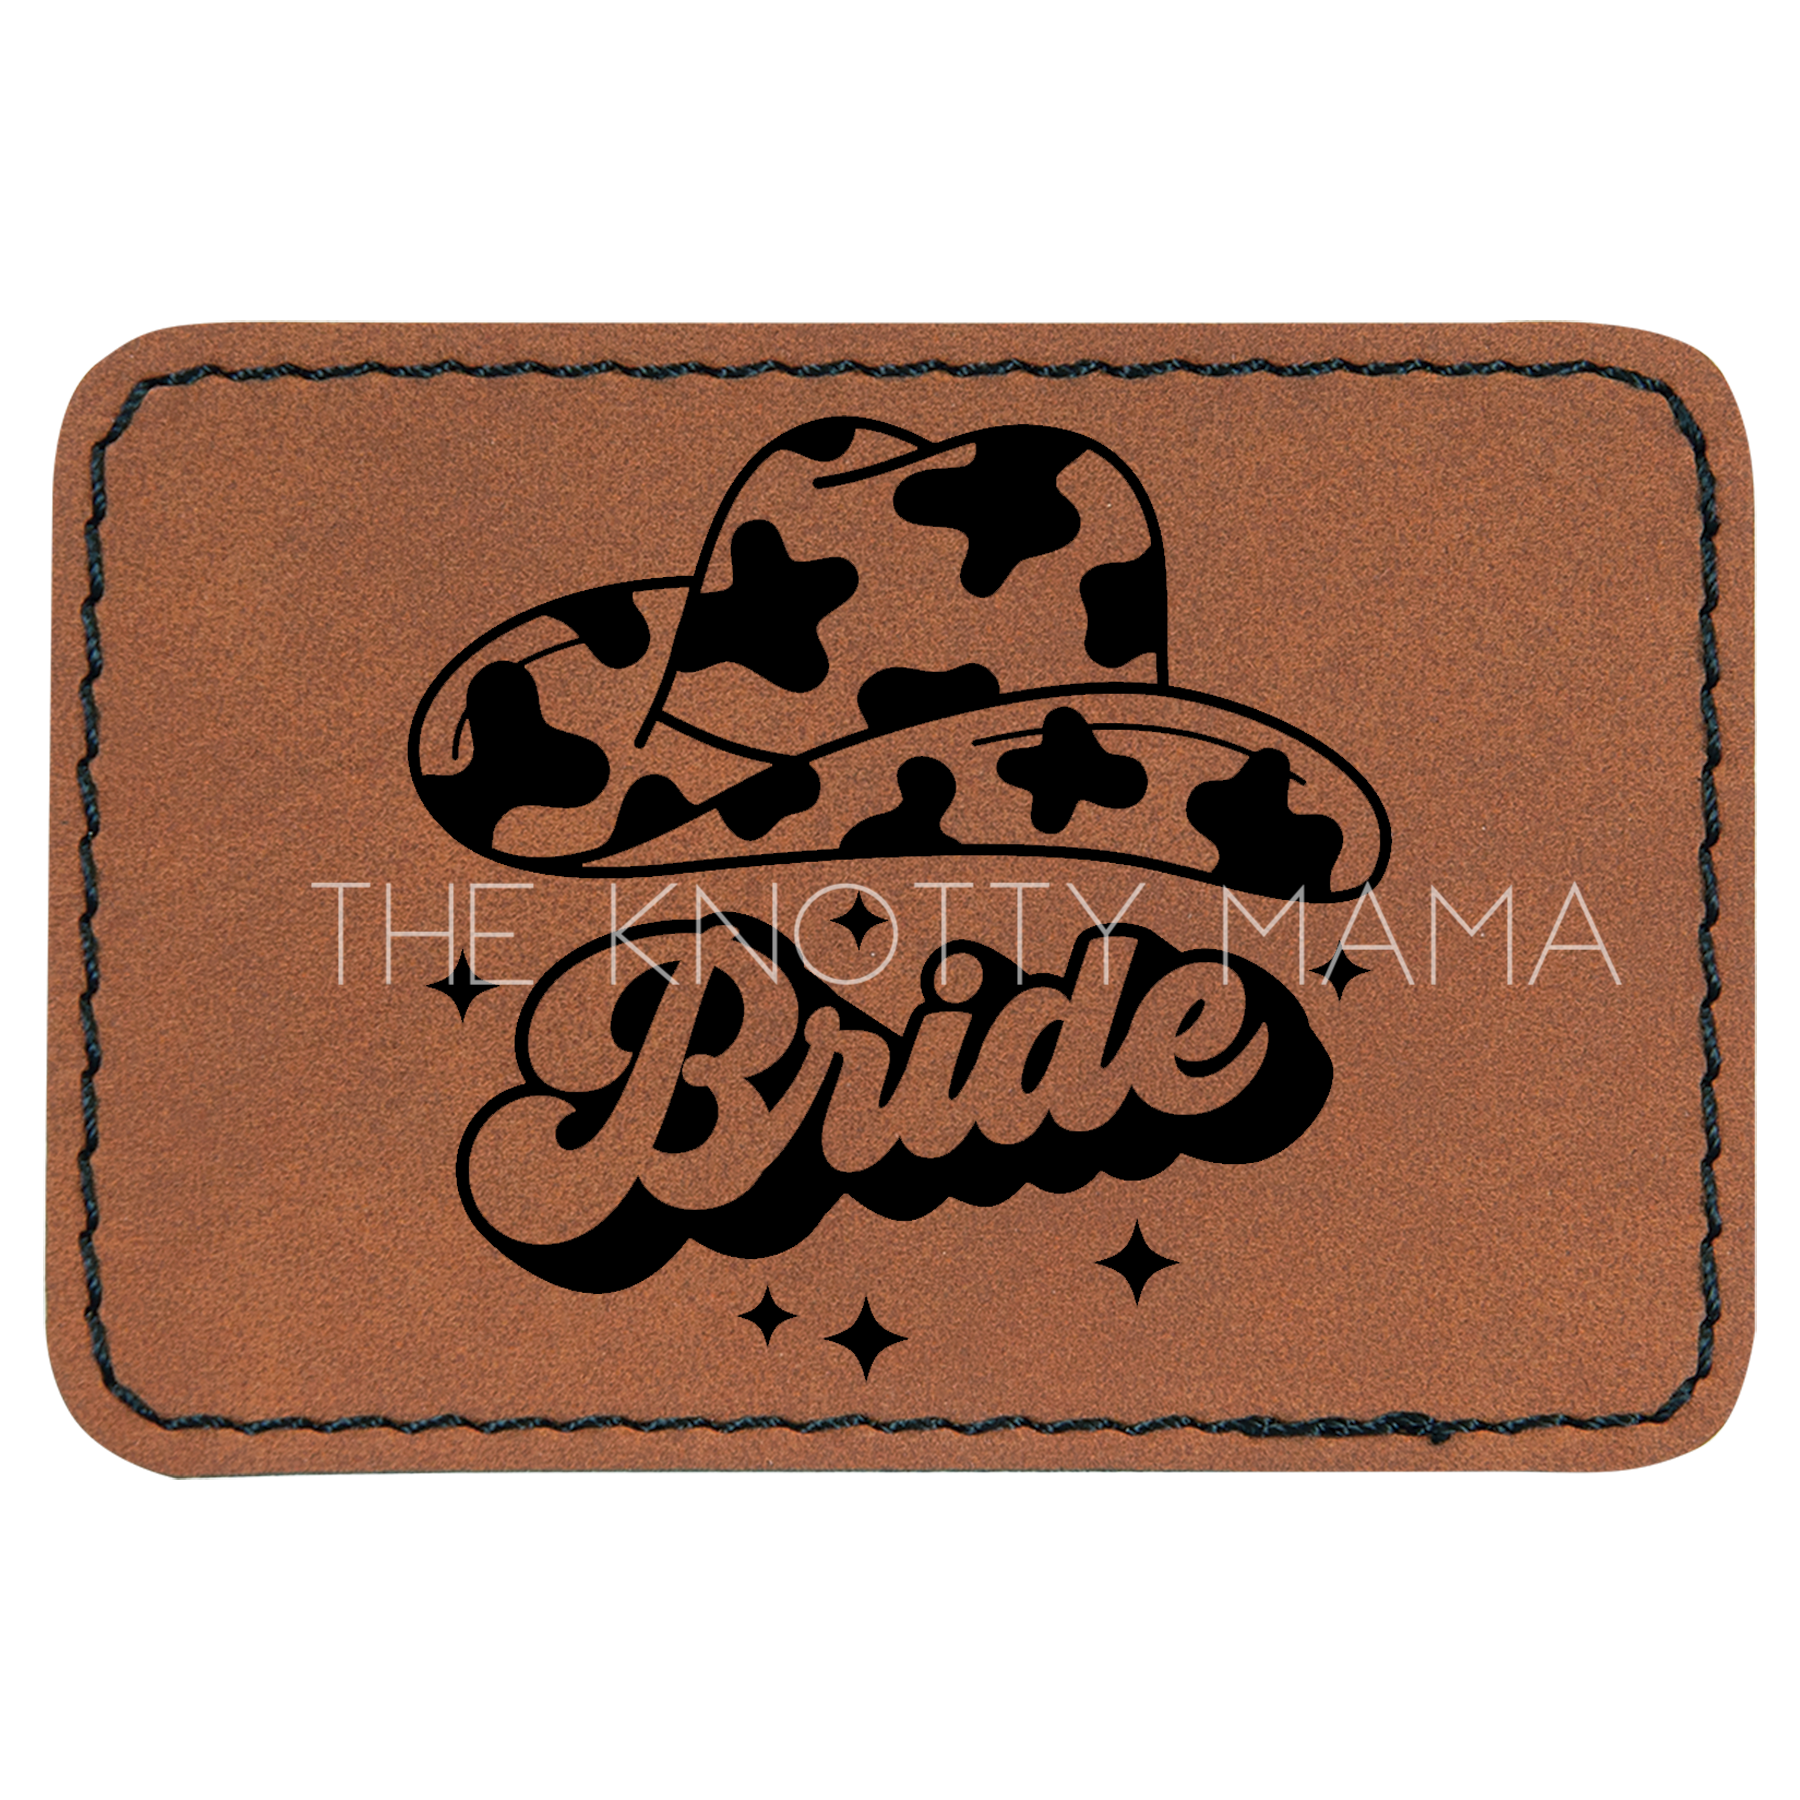 Howdy Bride Patch